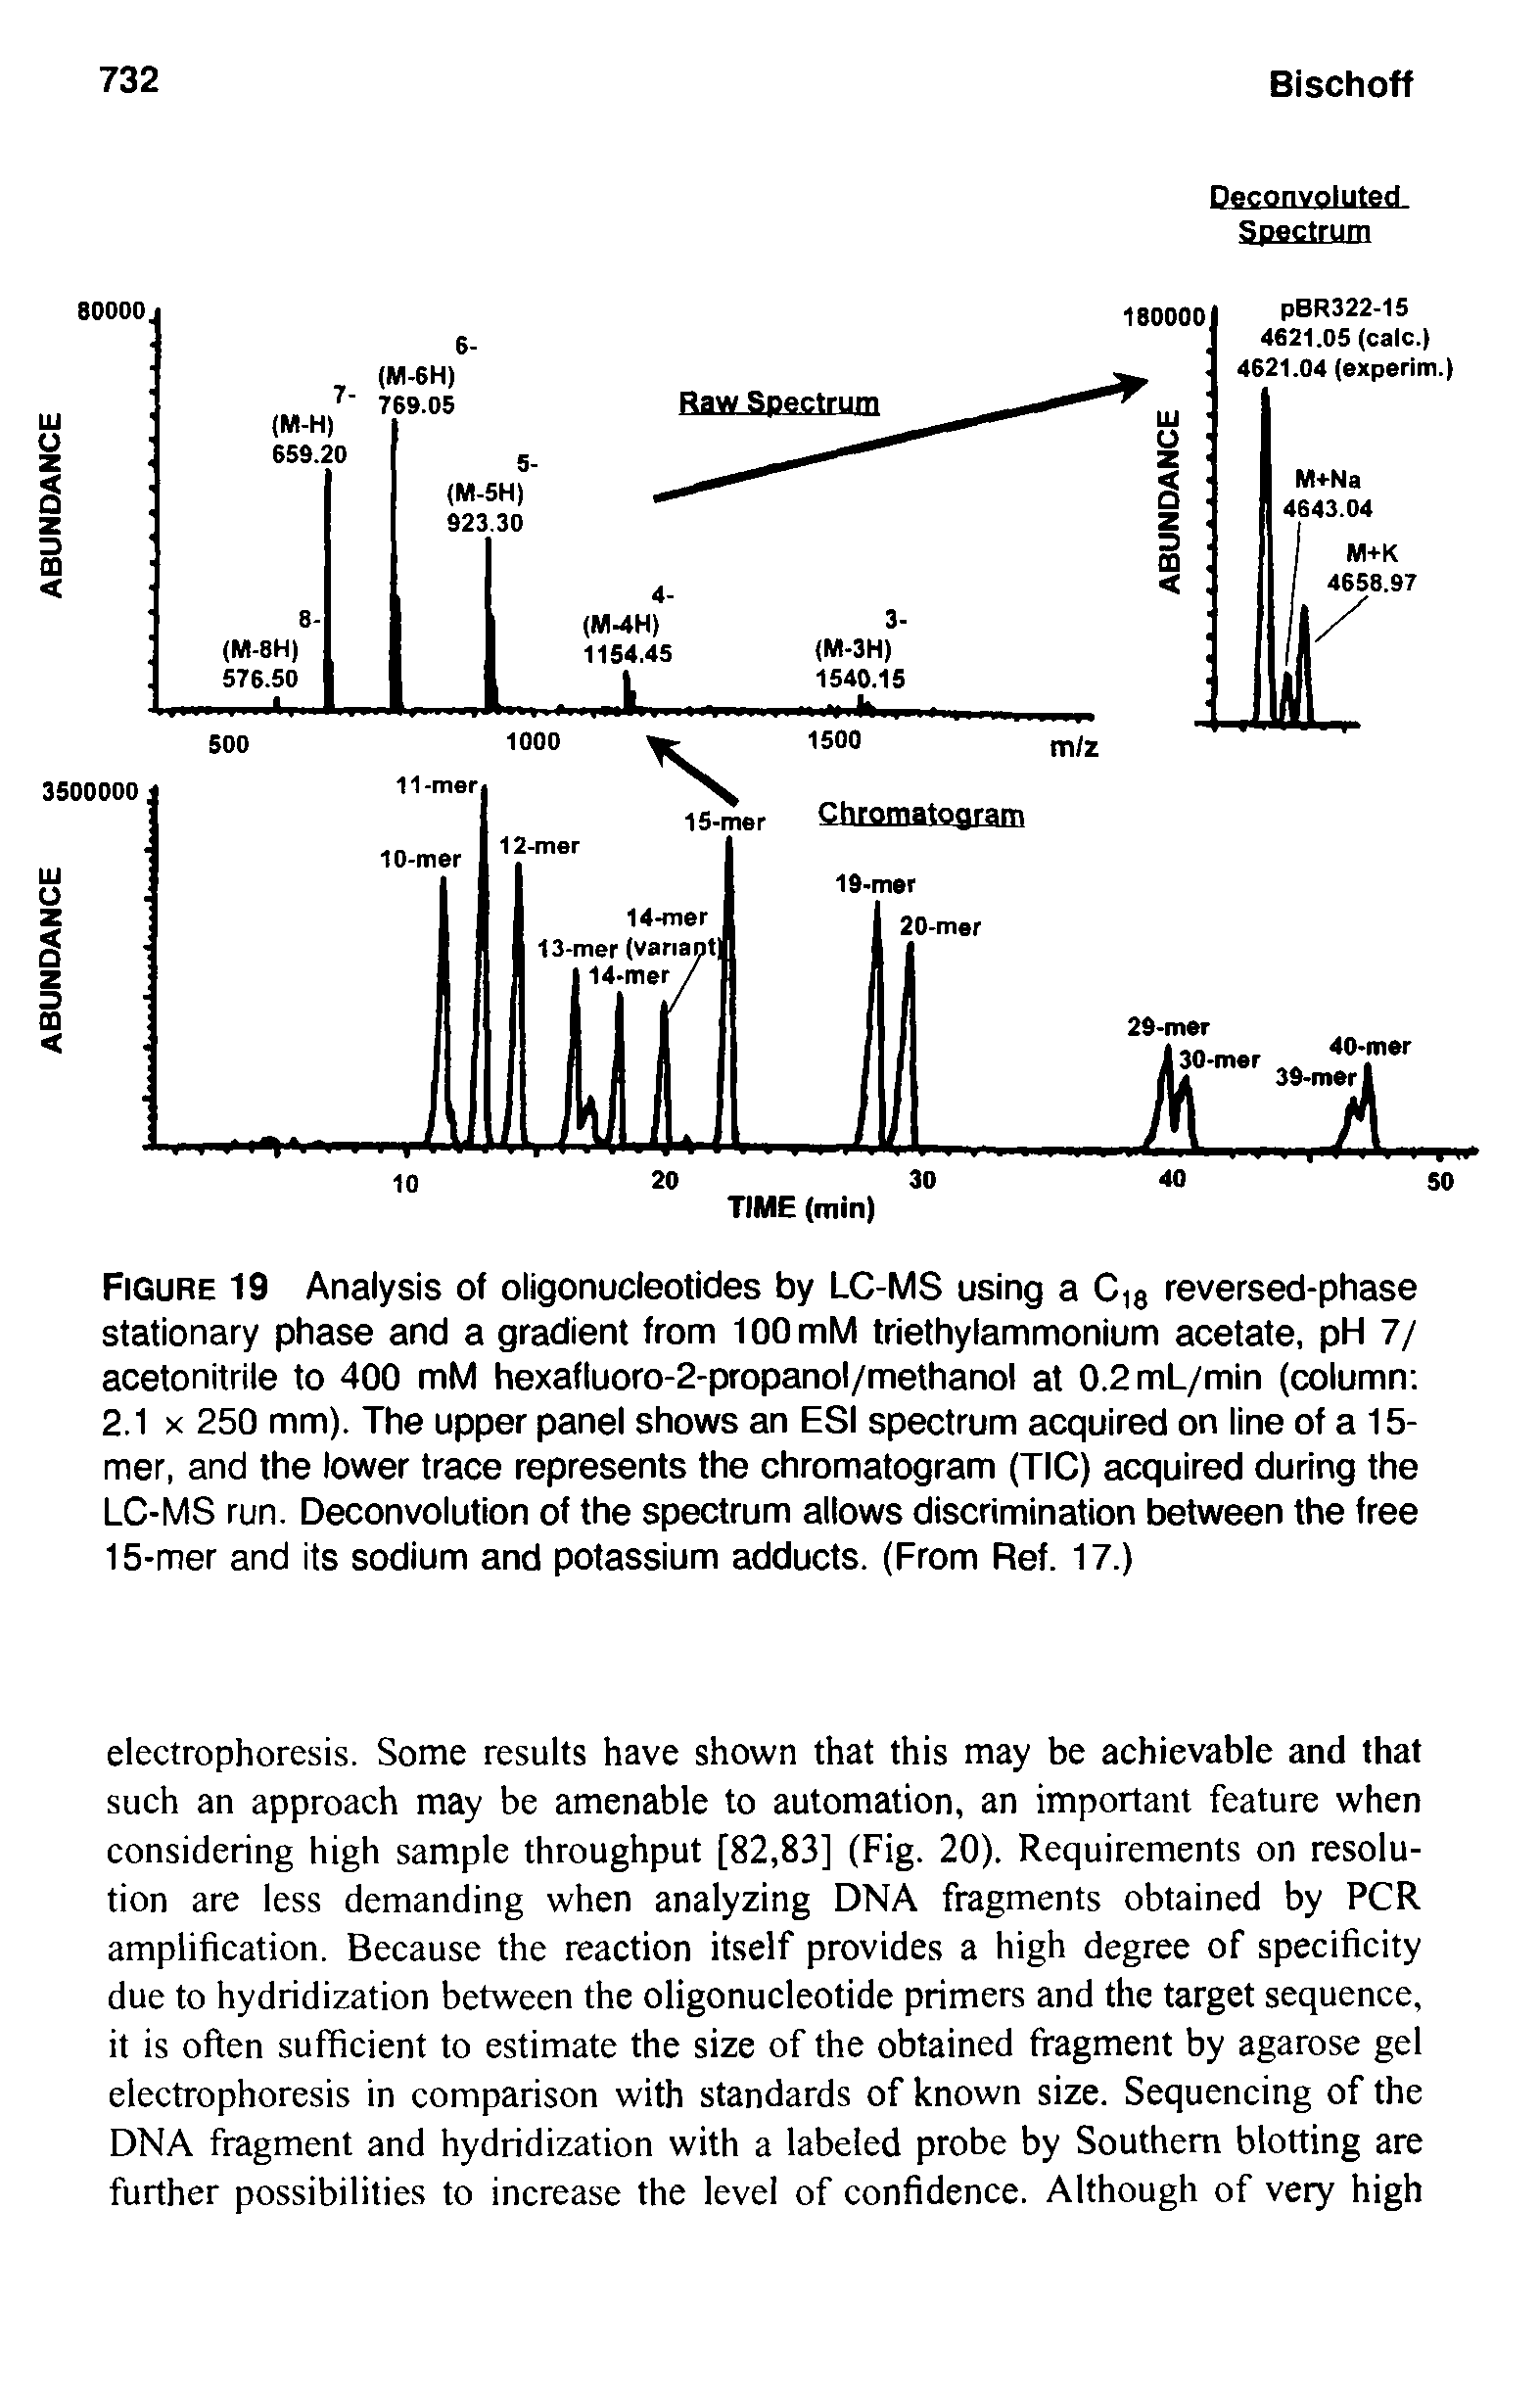 Figure 19 Analysis of oligonucleotides by LC-MS using a Cia reversed-phase stationary phase and a gradient from lOOmM triethylammonium acetate, pH 7/ acetonitrile to 400 mM hexafluoro-2-propanol/methanol at 0.2mL/min (column 2.1 X 250 mm). The upper panel shows an ESI spectrum acquired on line of a 15-mer, and the lower trace represents the chromatogram (TIC) acquired during the LC-MS run. Deconvolution of the spectrum allows discrimination between the free 15-mer and its sodium and potassium adducts. (From Ref. 17.)...